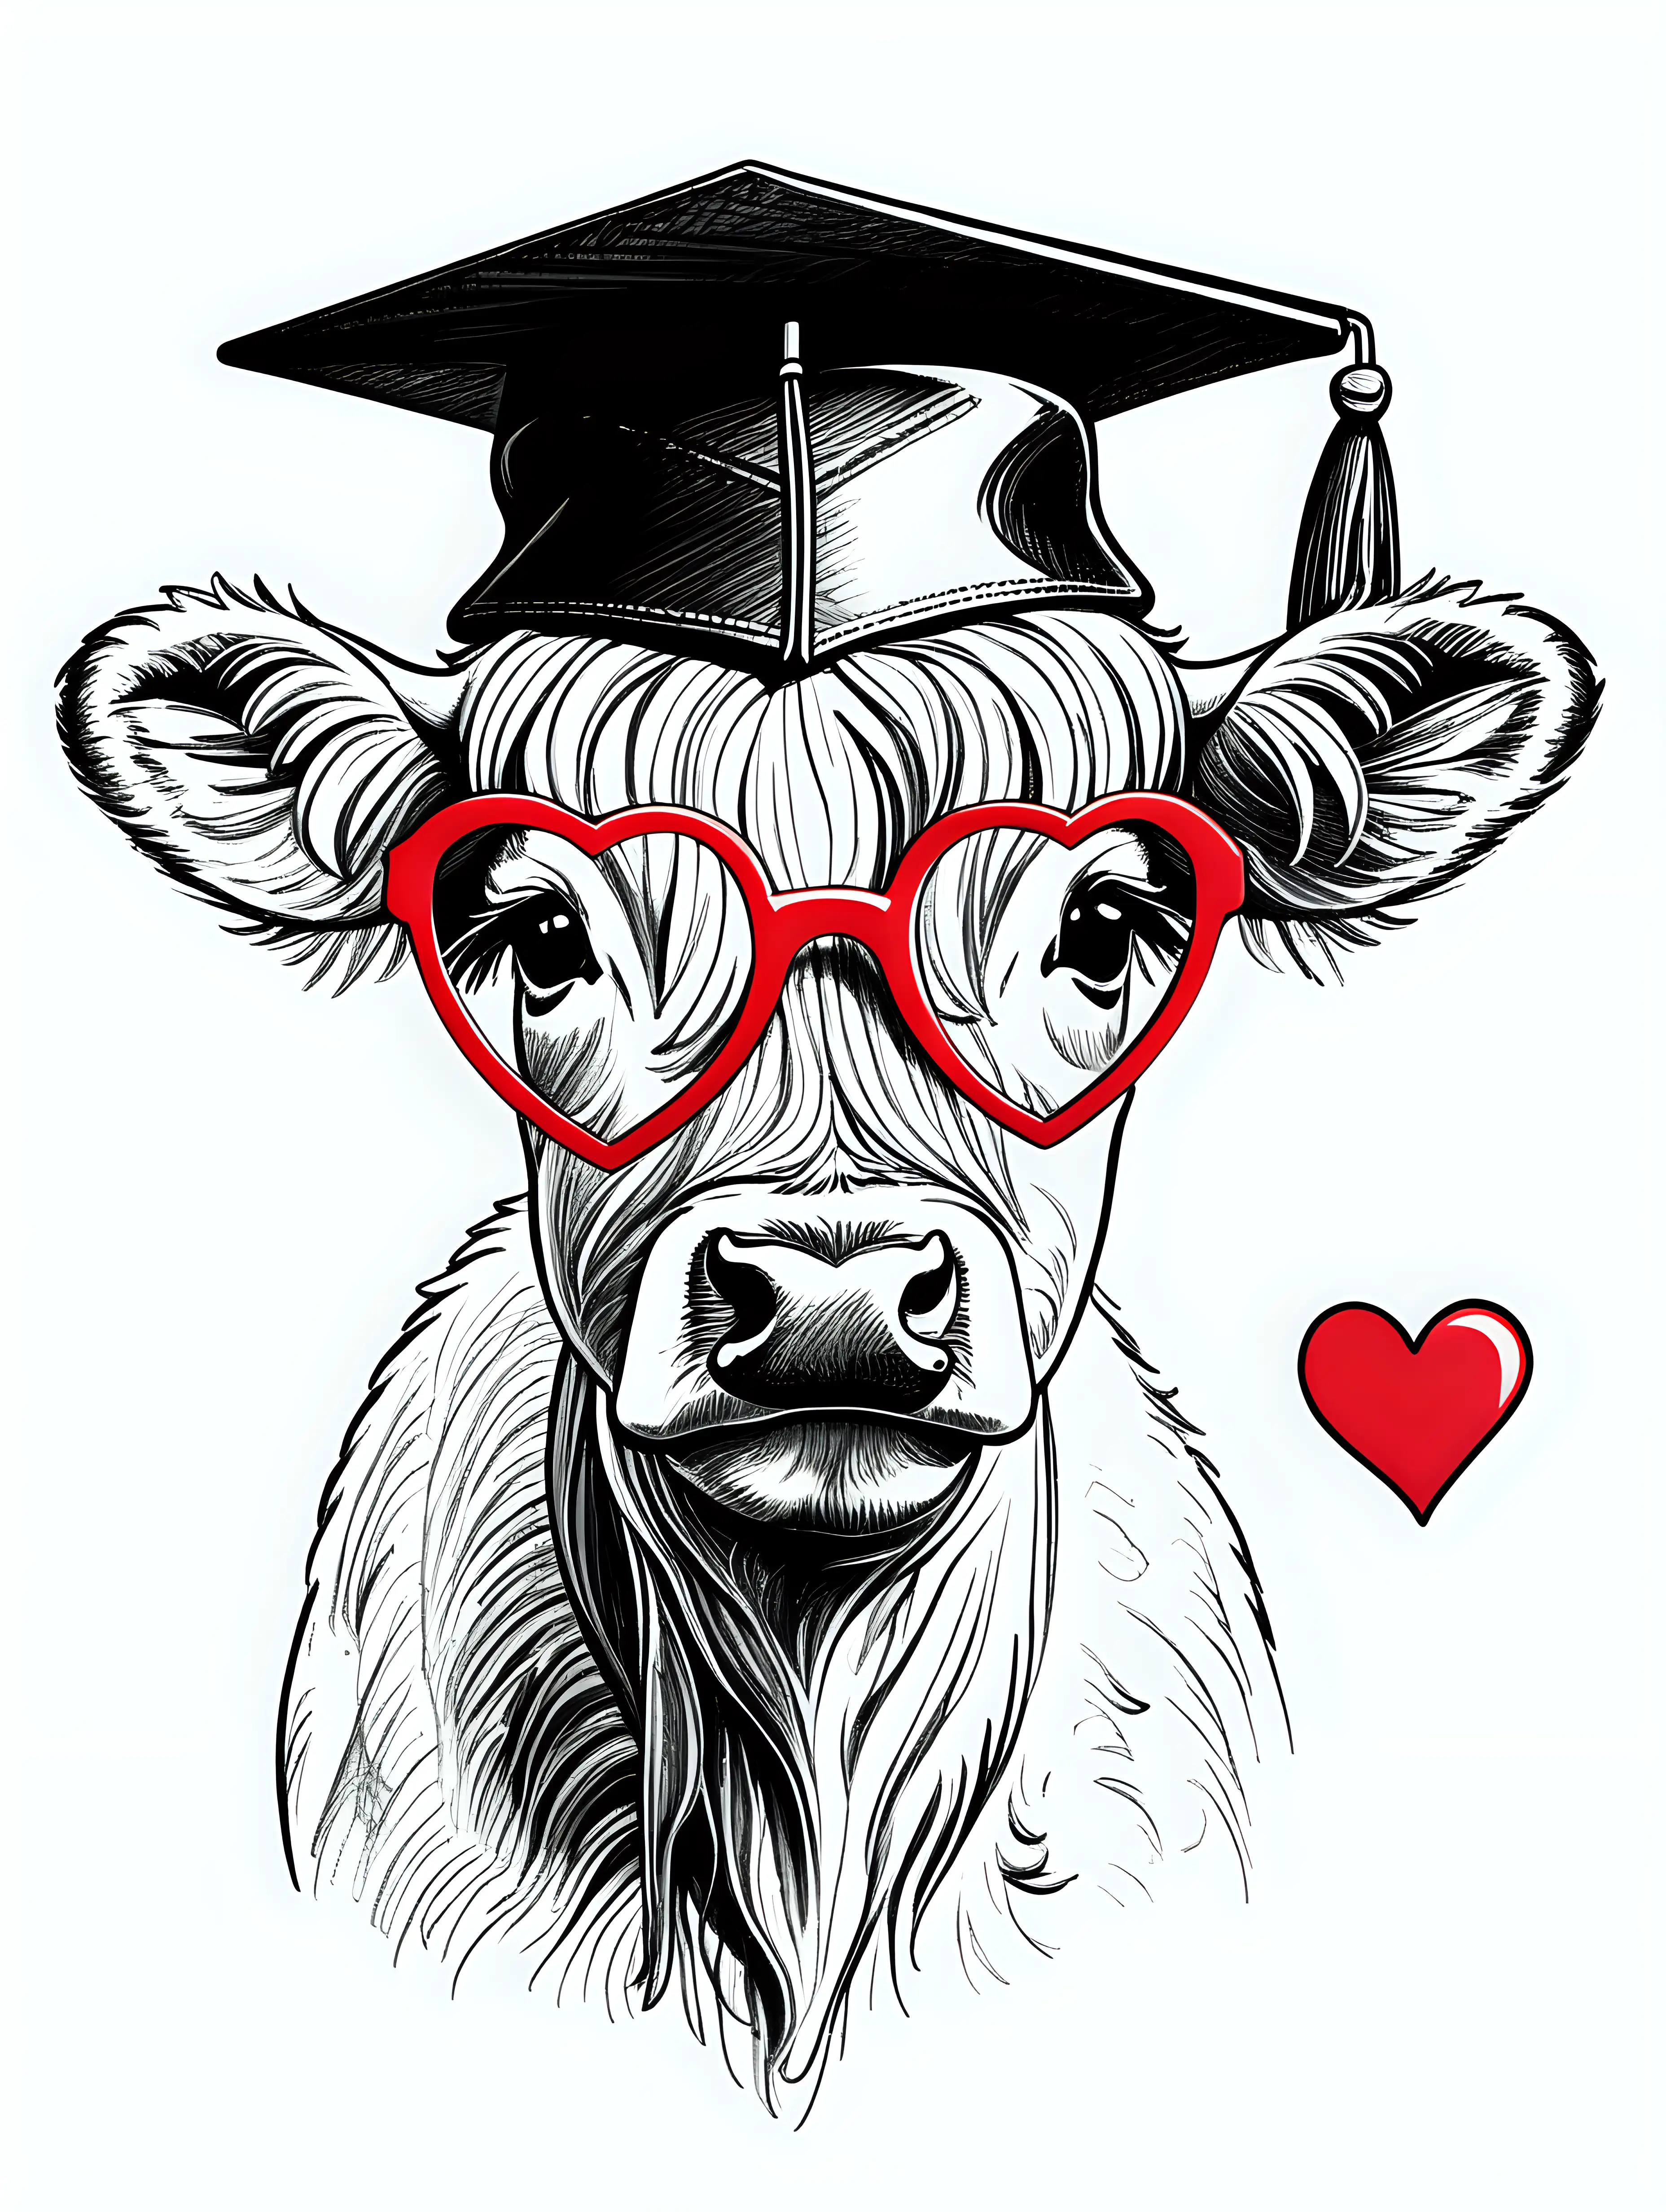 Isolated black line detailed sketch illustration of an adorable highland calf head wearing red heart glasses and graduation cap